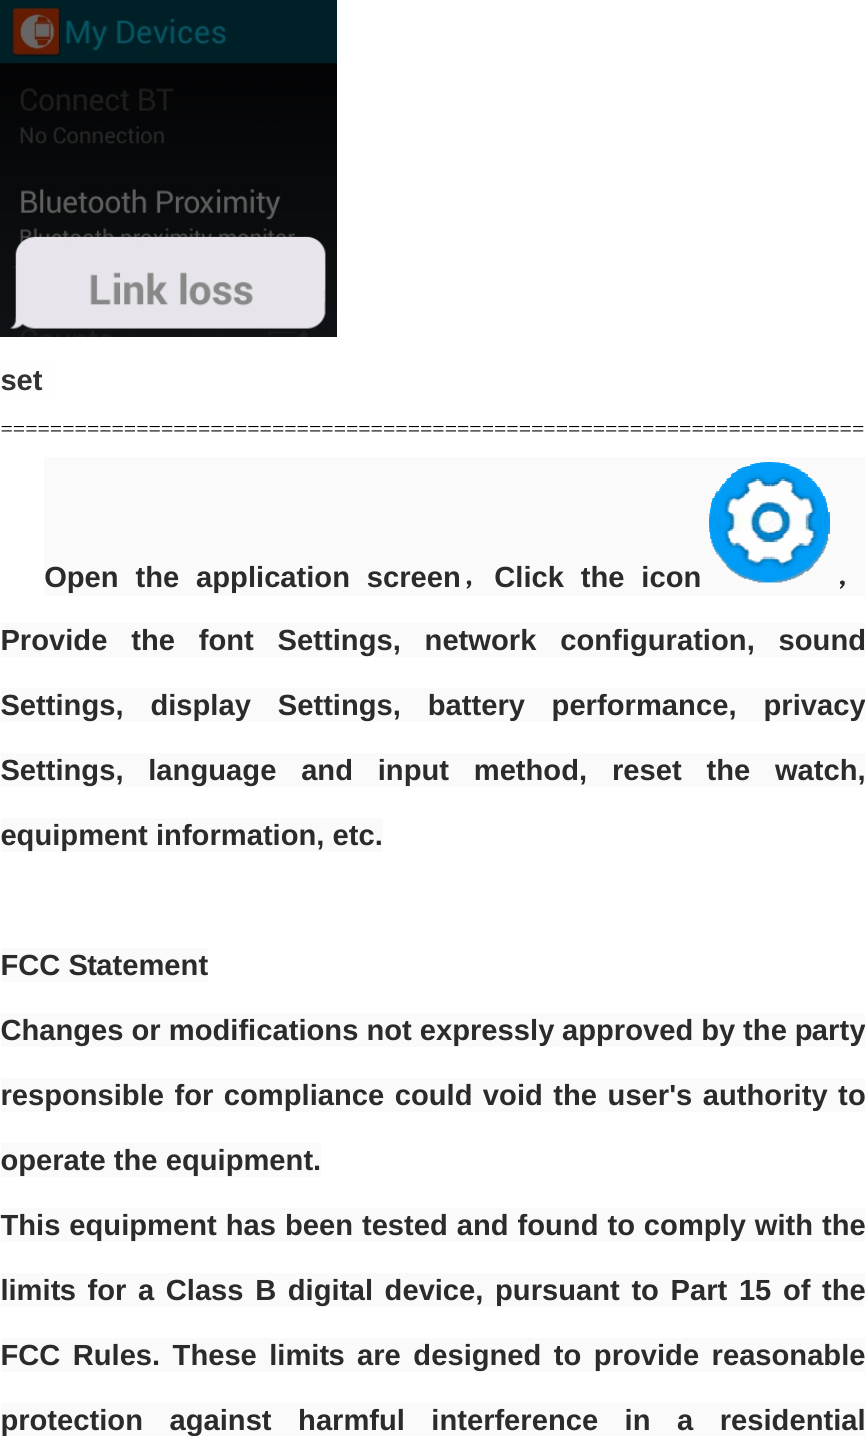   set  ====================================================================== Open the application screen，Click the icon ，Provide the font Settings, network configuration, sound Settings, display Settings, battery performance, privacy Settings, language and input method, reset the watch, equipment information, etc.   FCC Statement Changes or modifications not expressly approved by the party responsible for compliance could void the user&apos;s authority to operate the equipment. This equipment has been tested and found to comply with the limits for a Class B digital device, pursuant to Part 15 of the FCC Rules. These limits are designed to provide reasonable protection against harmful interference in a residential 